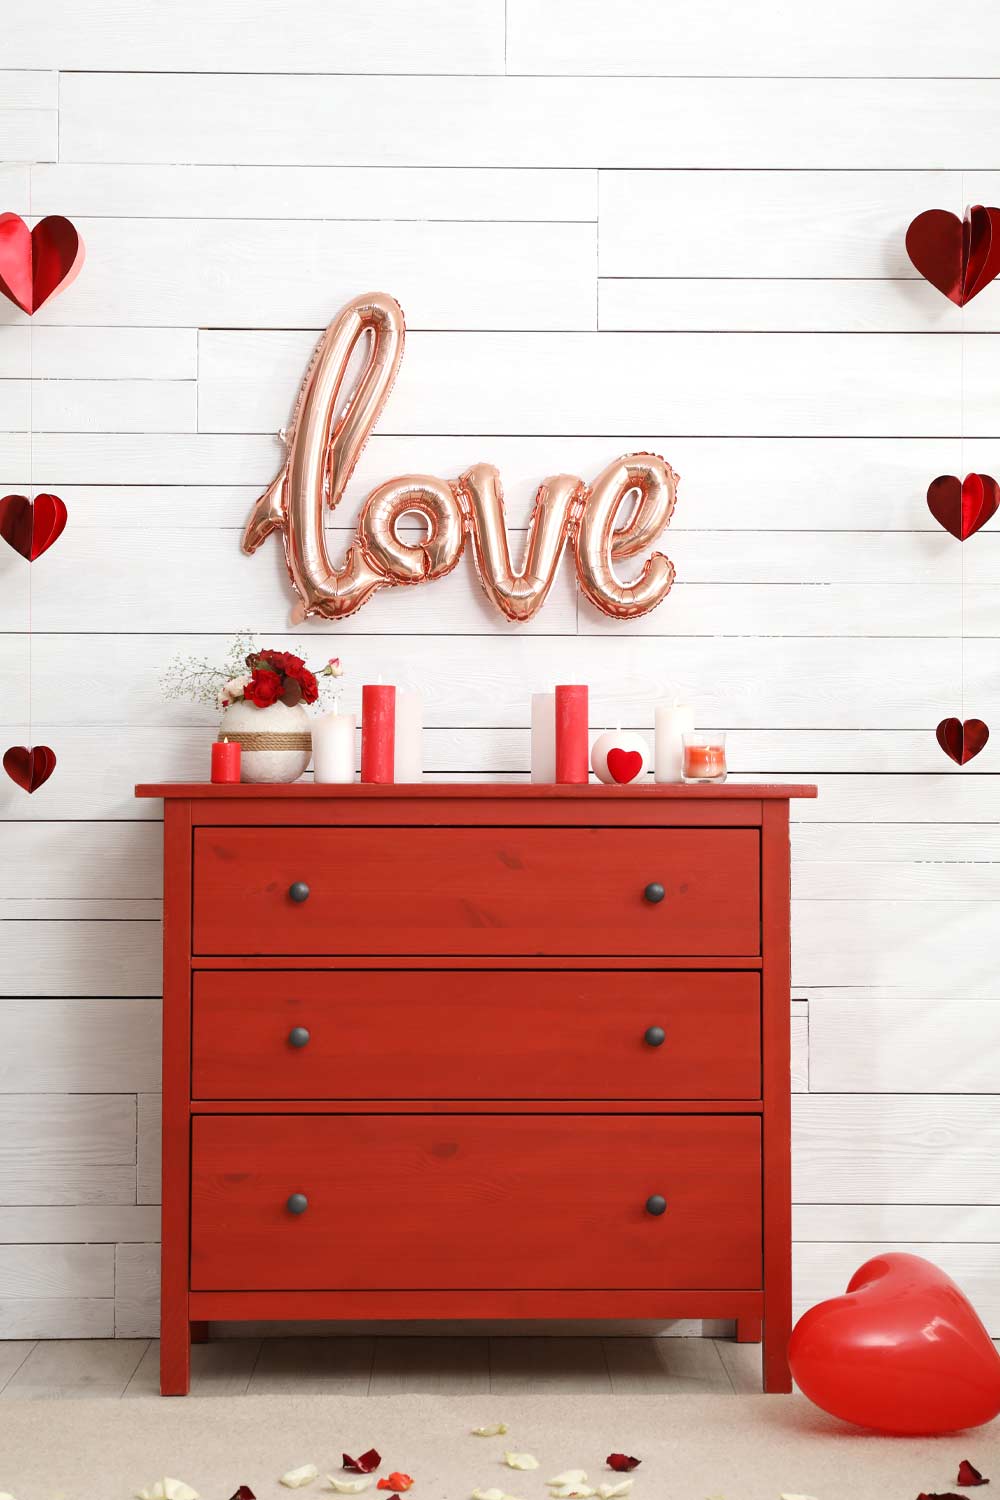 V Day Decoration with Lettering